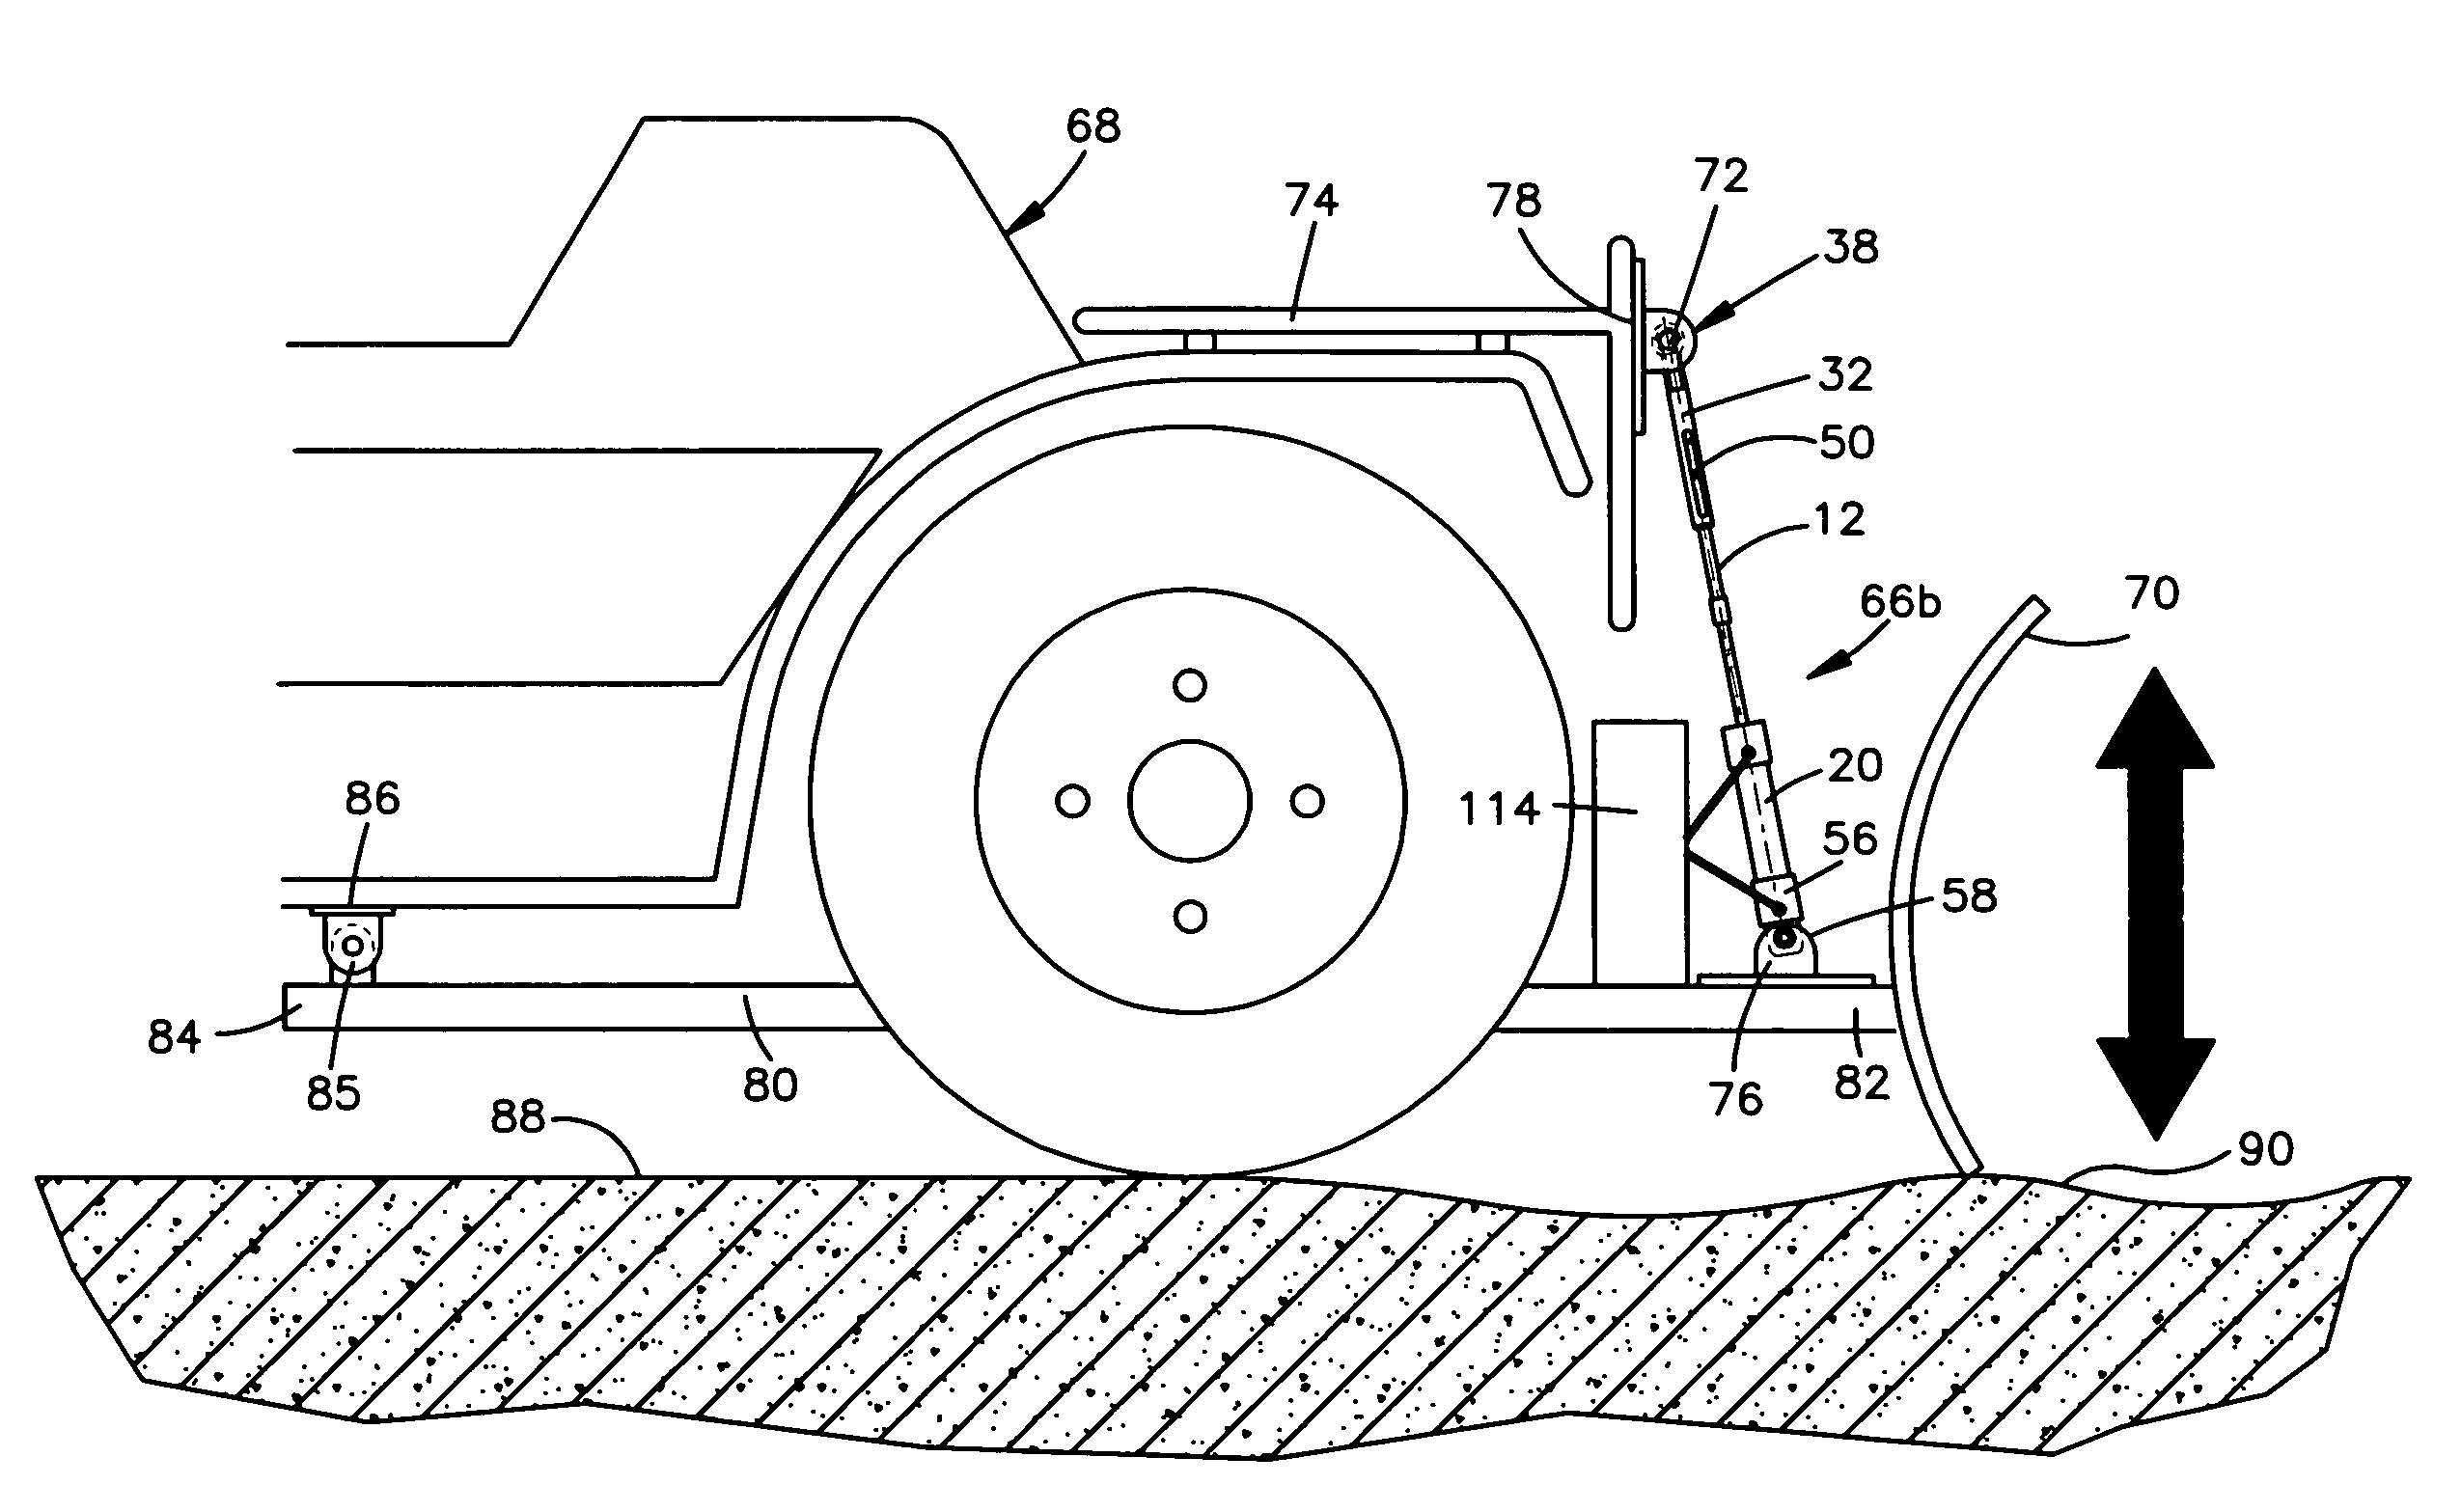 Lost motion mechanism for movable vehicle implements